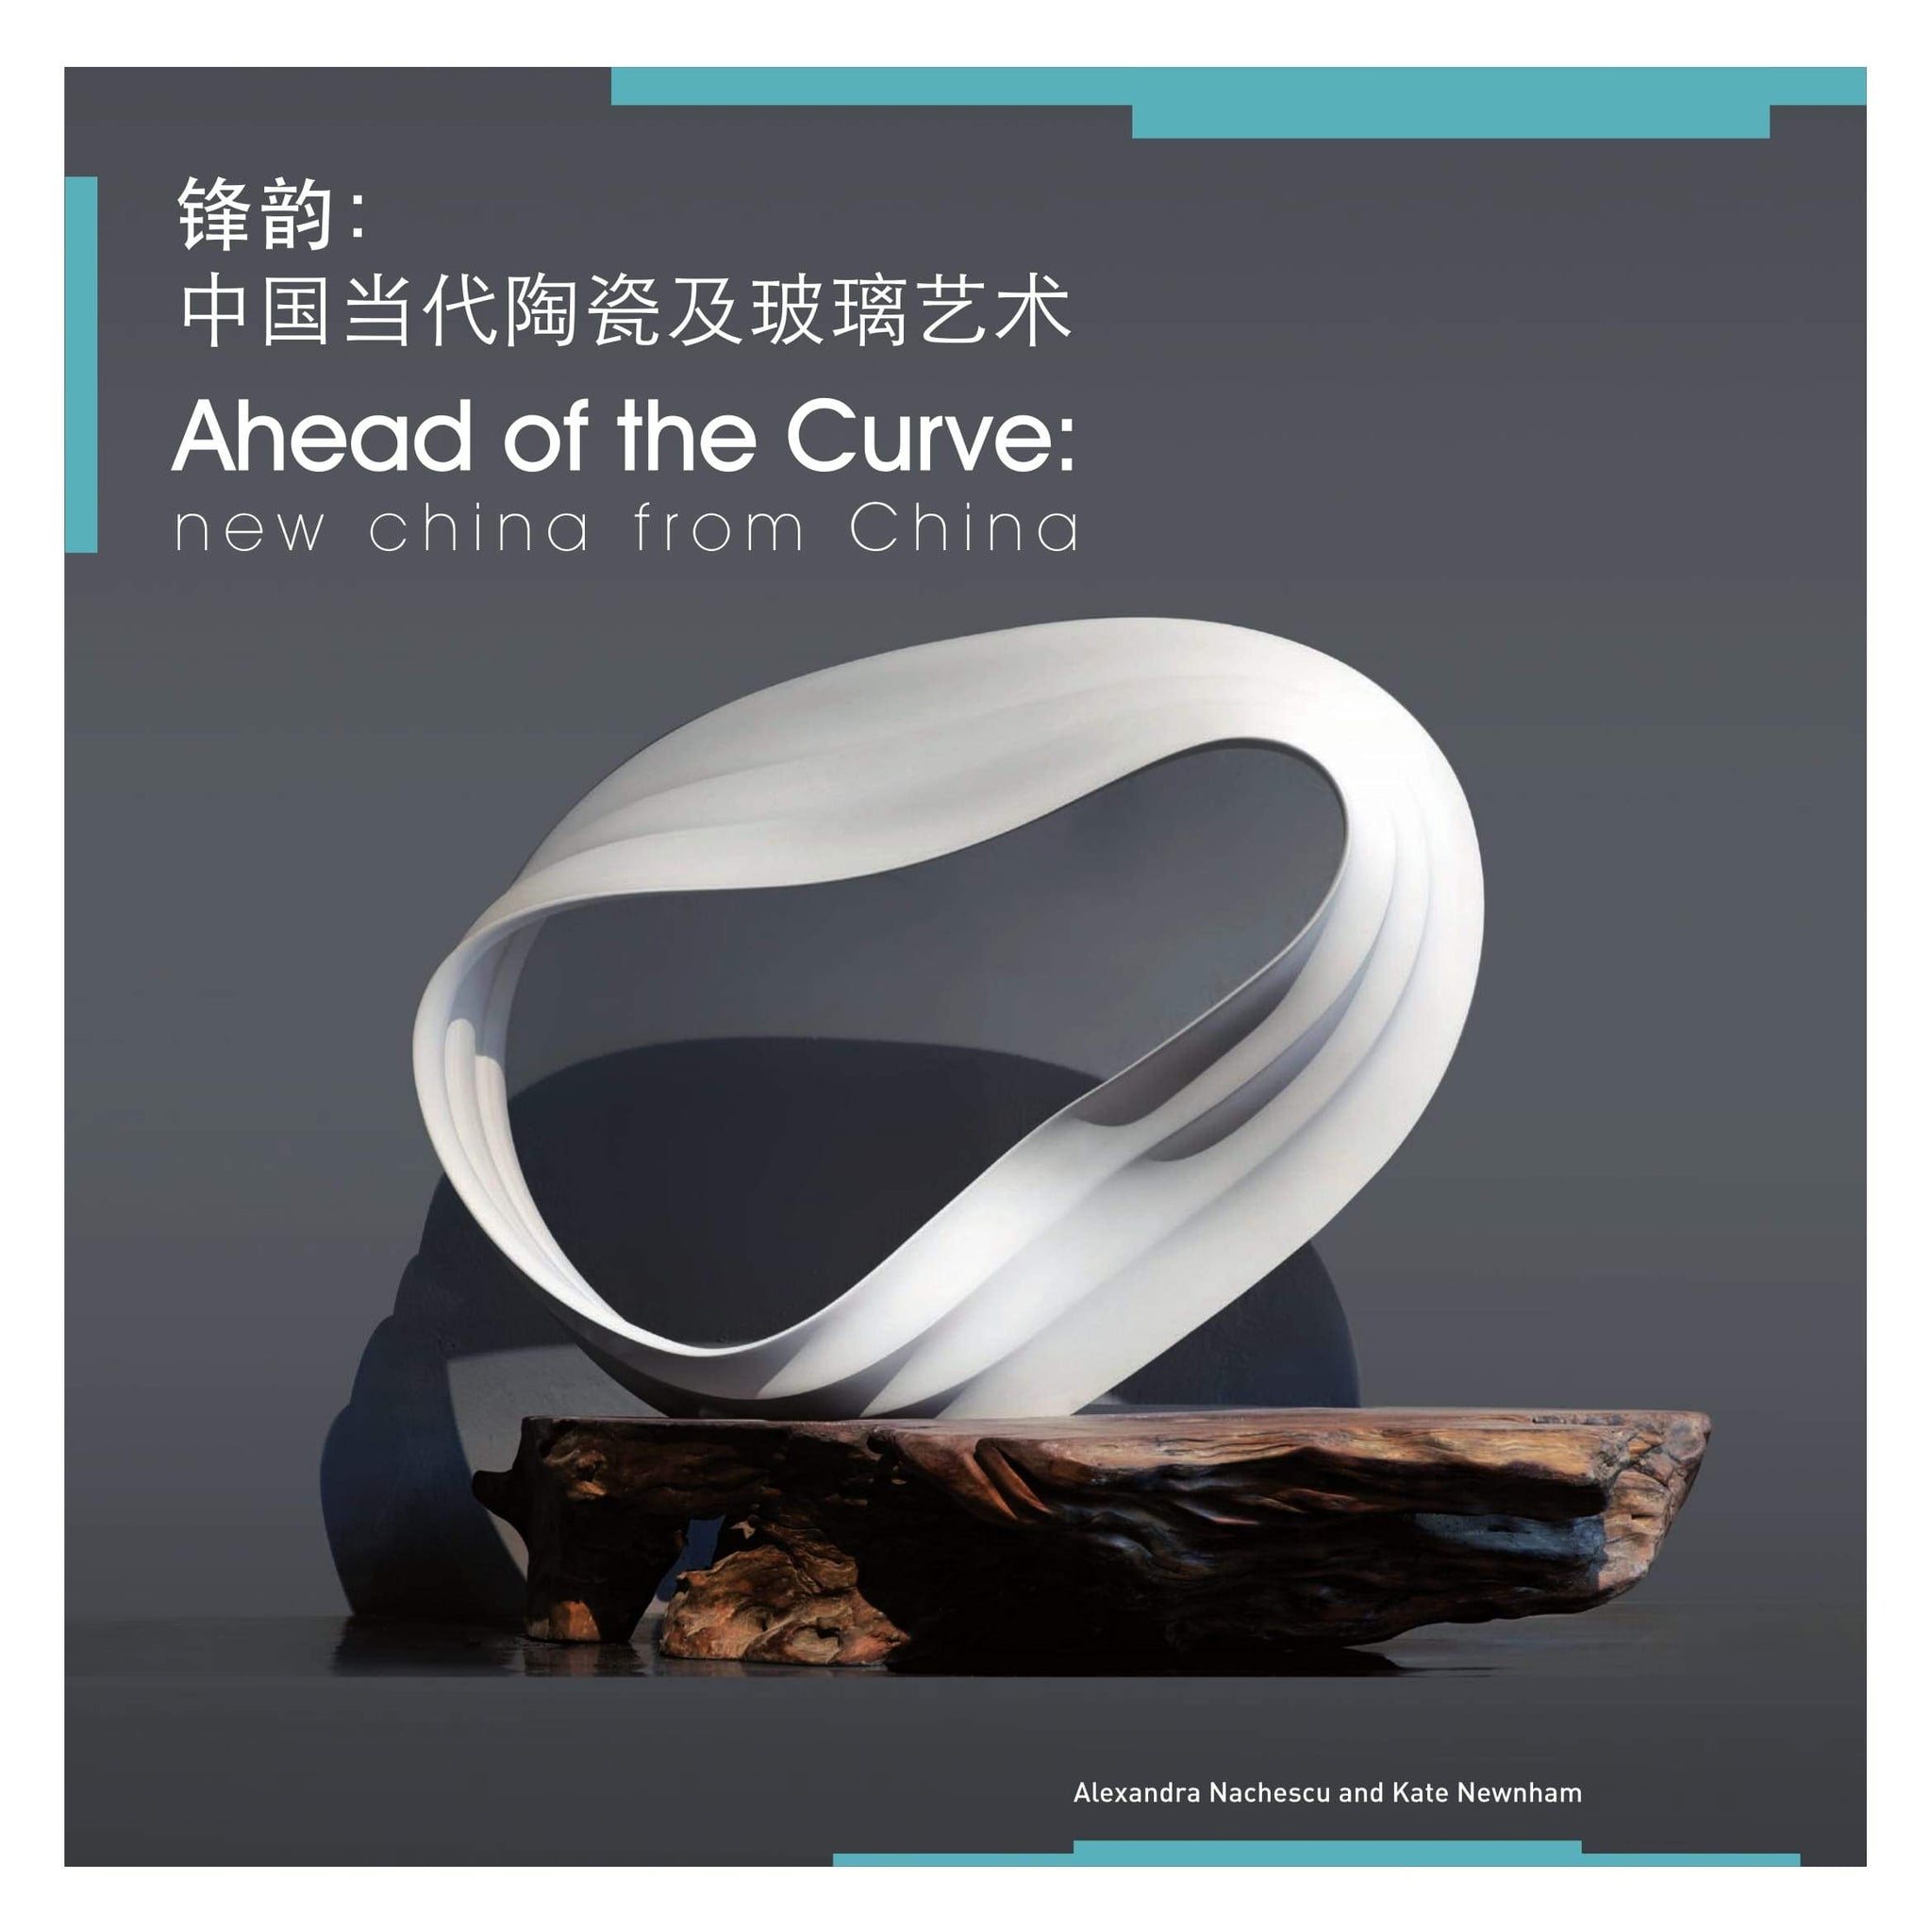 Ahead of the Curve Exhibition Catalogue